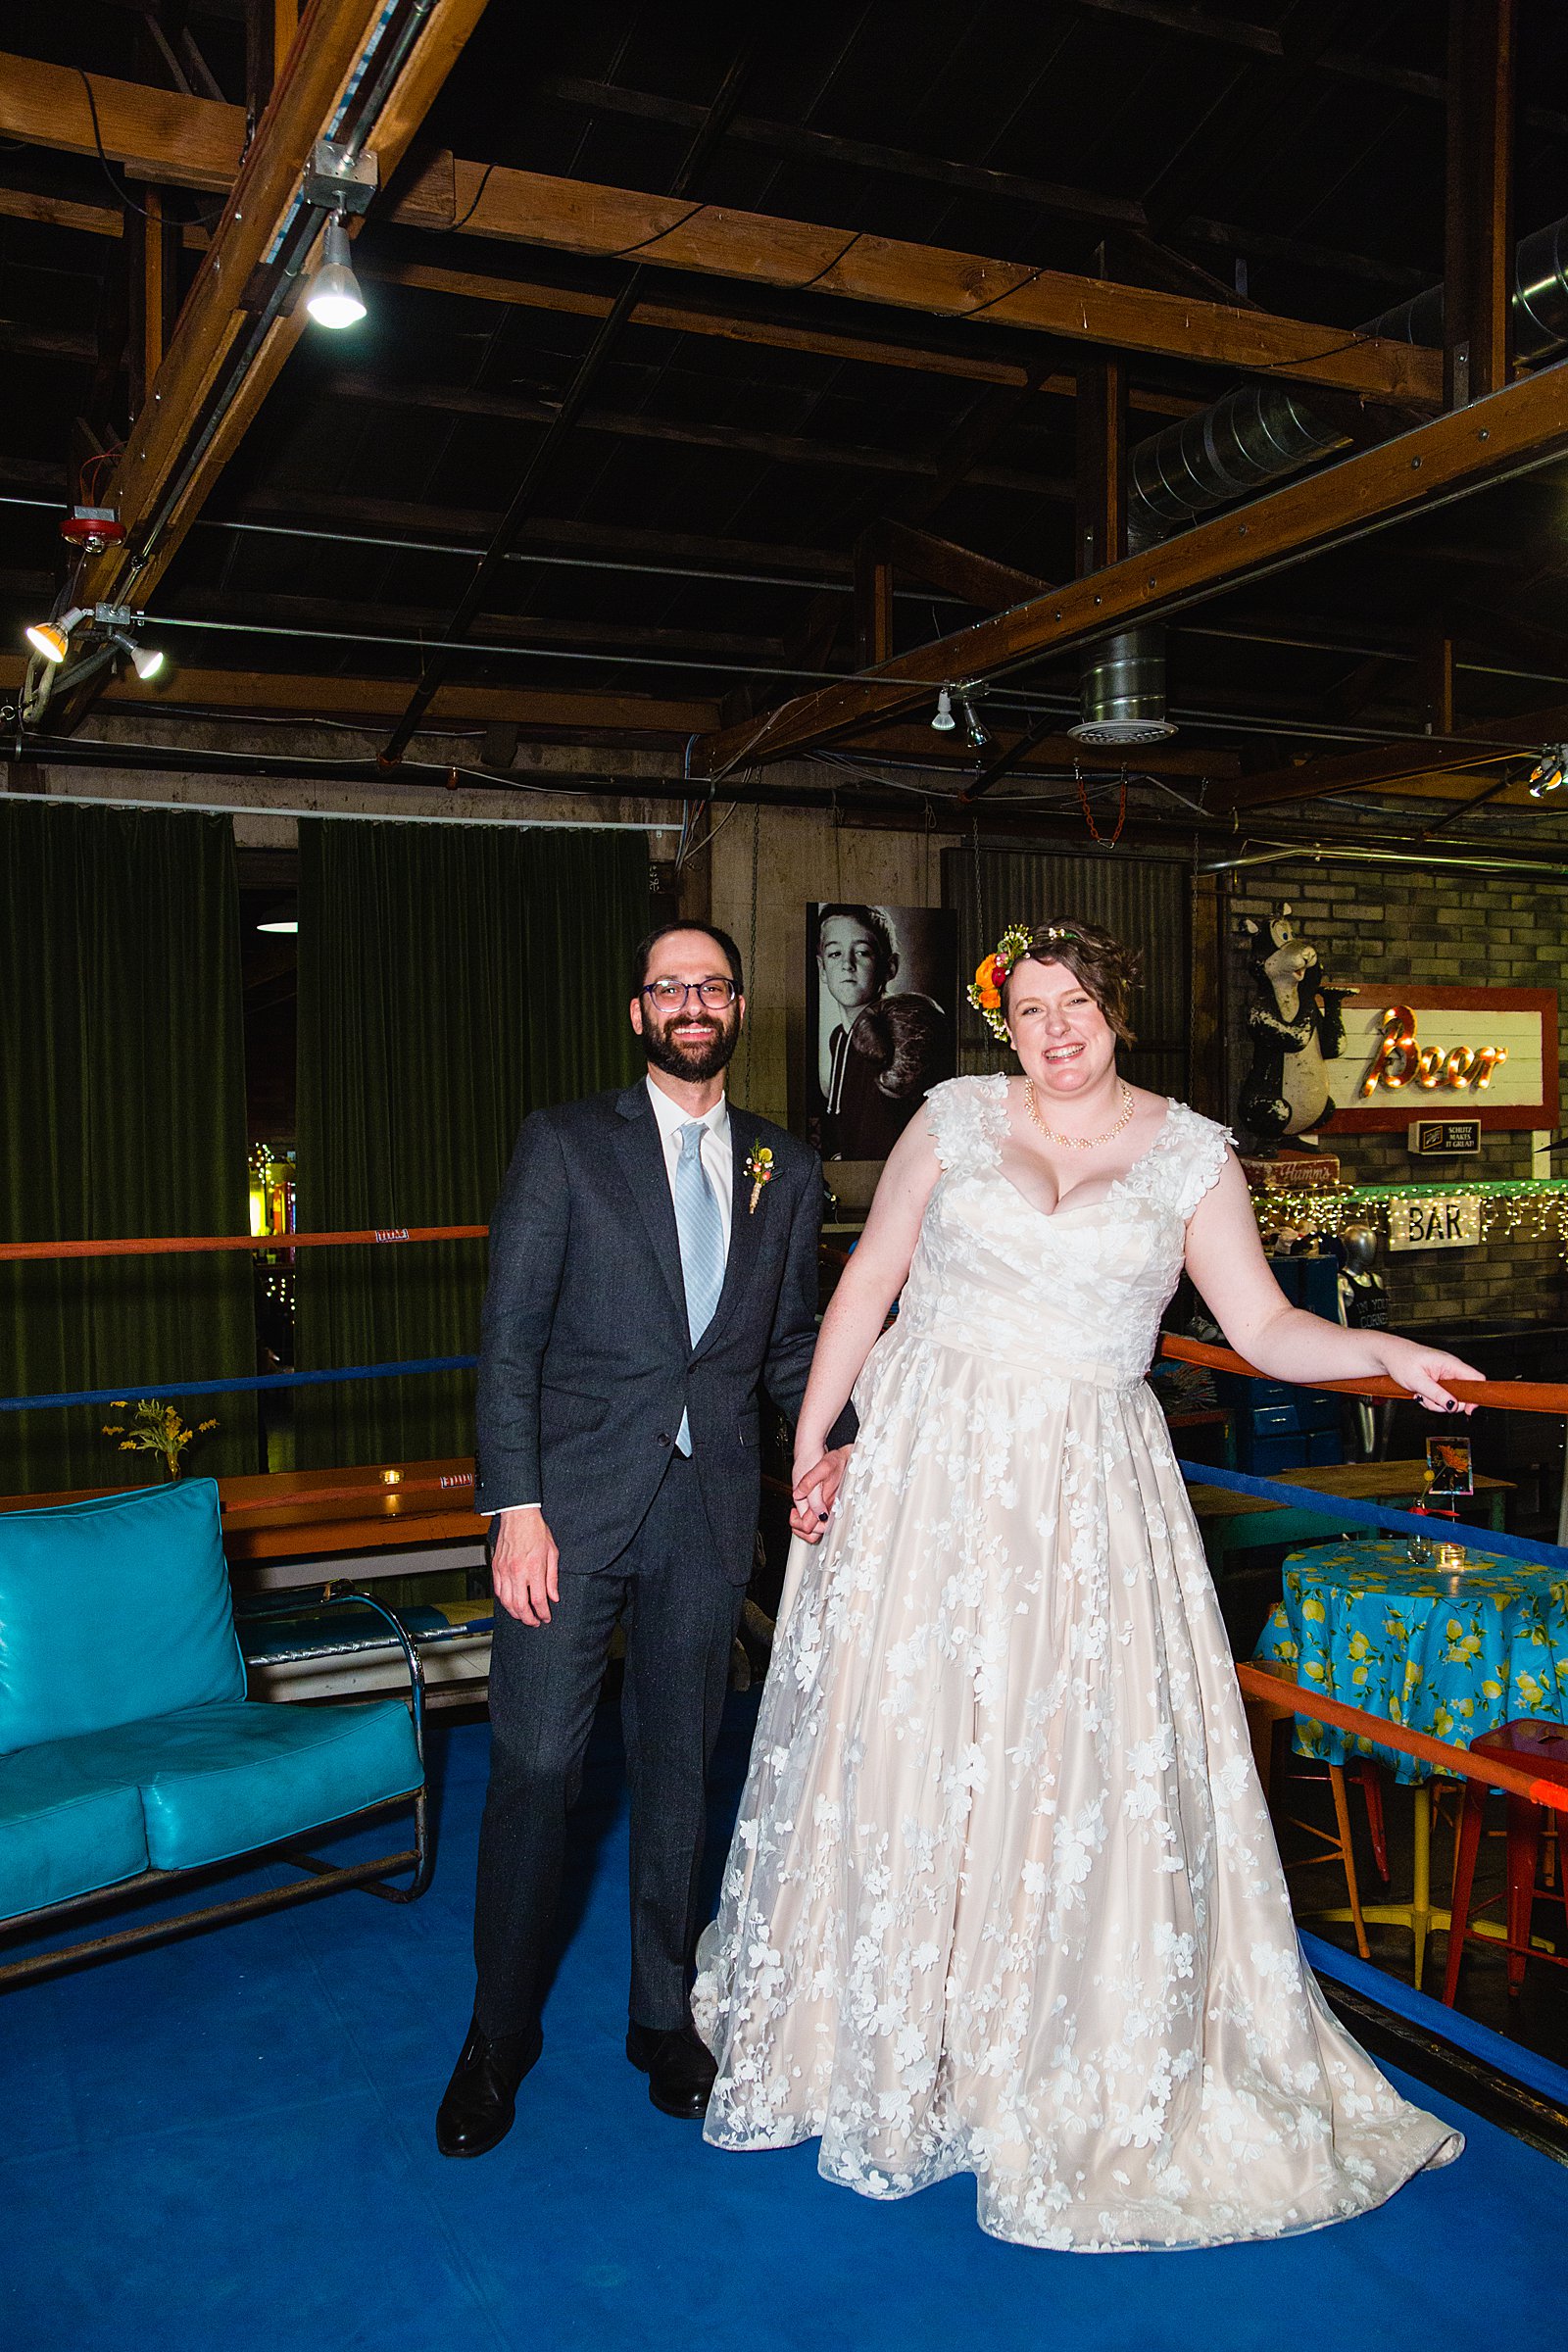 Bride and groom together in the boxing ring at The Duce wedding reception by Phoneix wedding photographer PMA Photography.